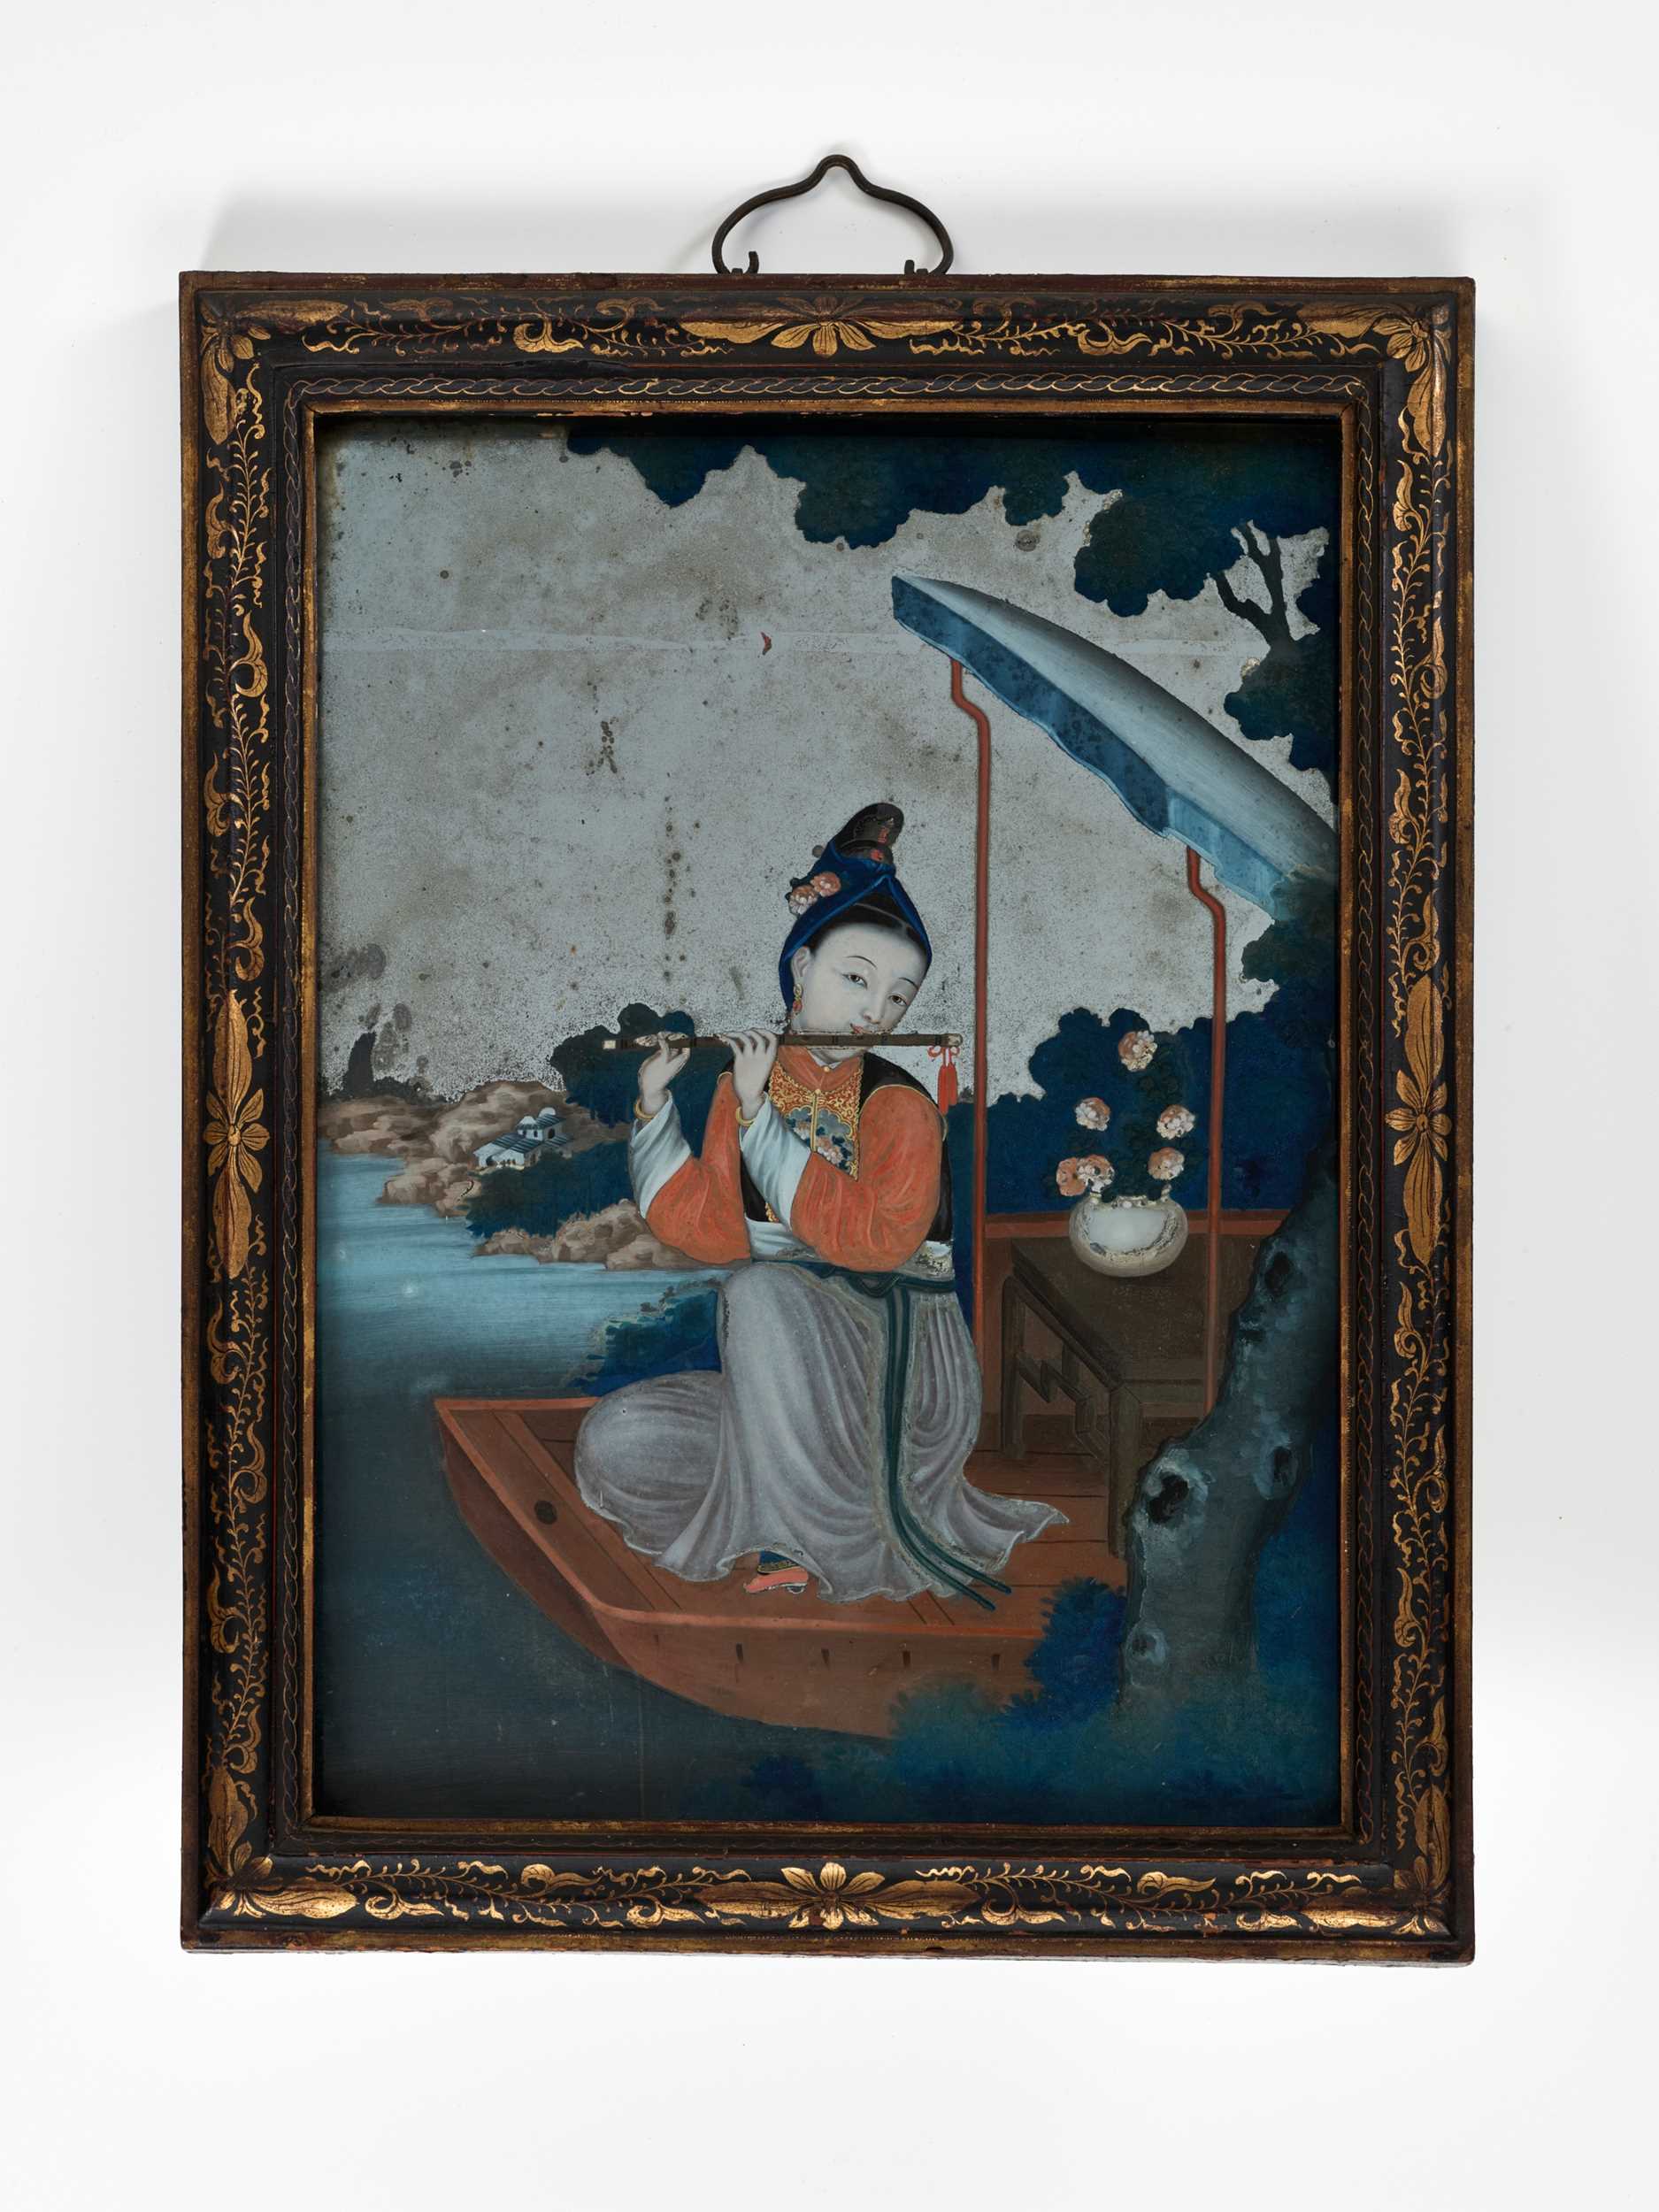 Lot 525 - A REVERSE-GLASS MIRROR PAINTING OF A LADY PLAYING THE DIZI, QING DYNASTY